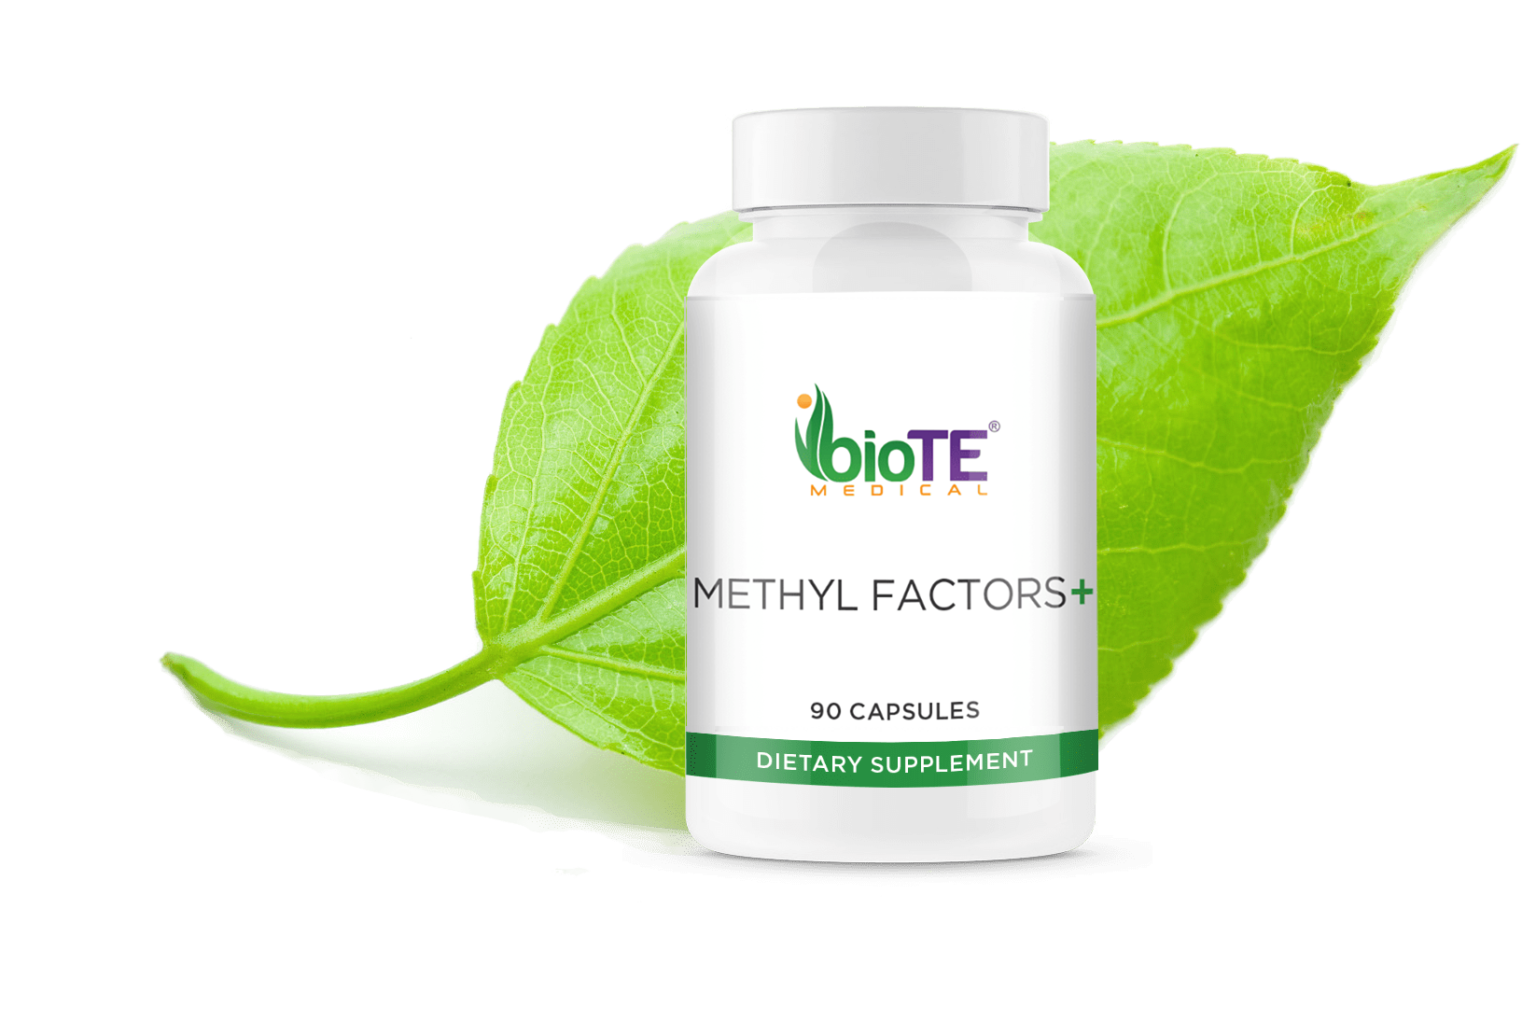 06_Nutraceuticals_DT_Products_Methyl Factors.